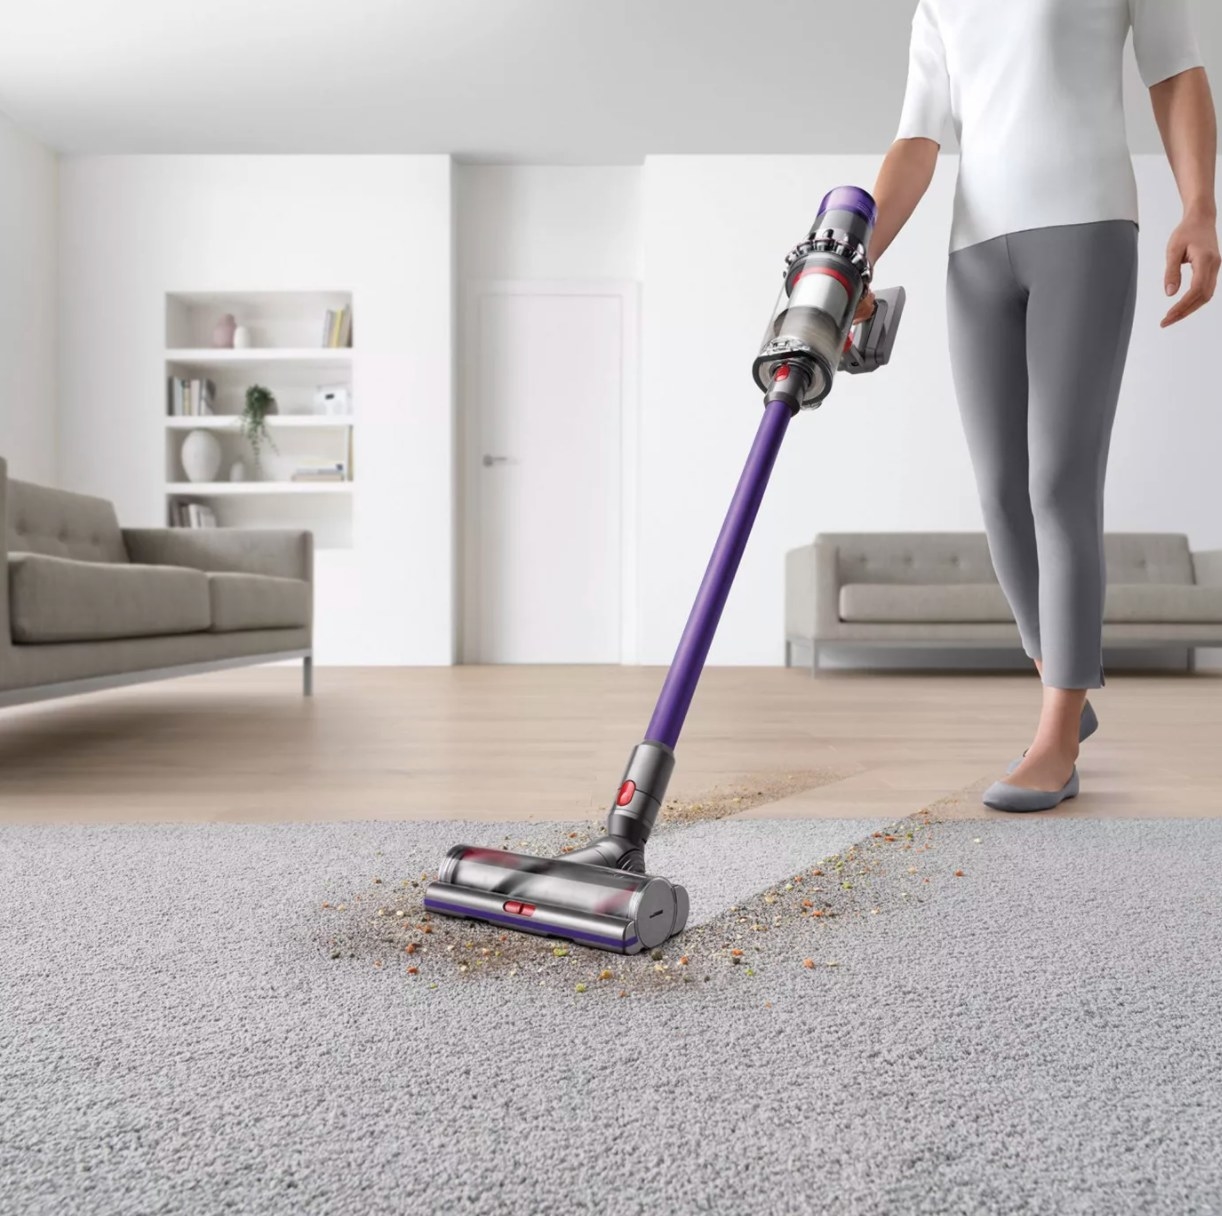 The purple and silver vacuum